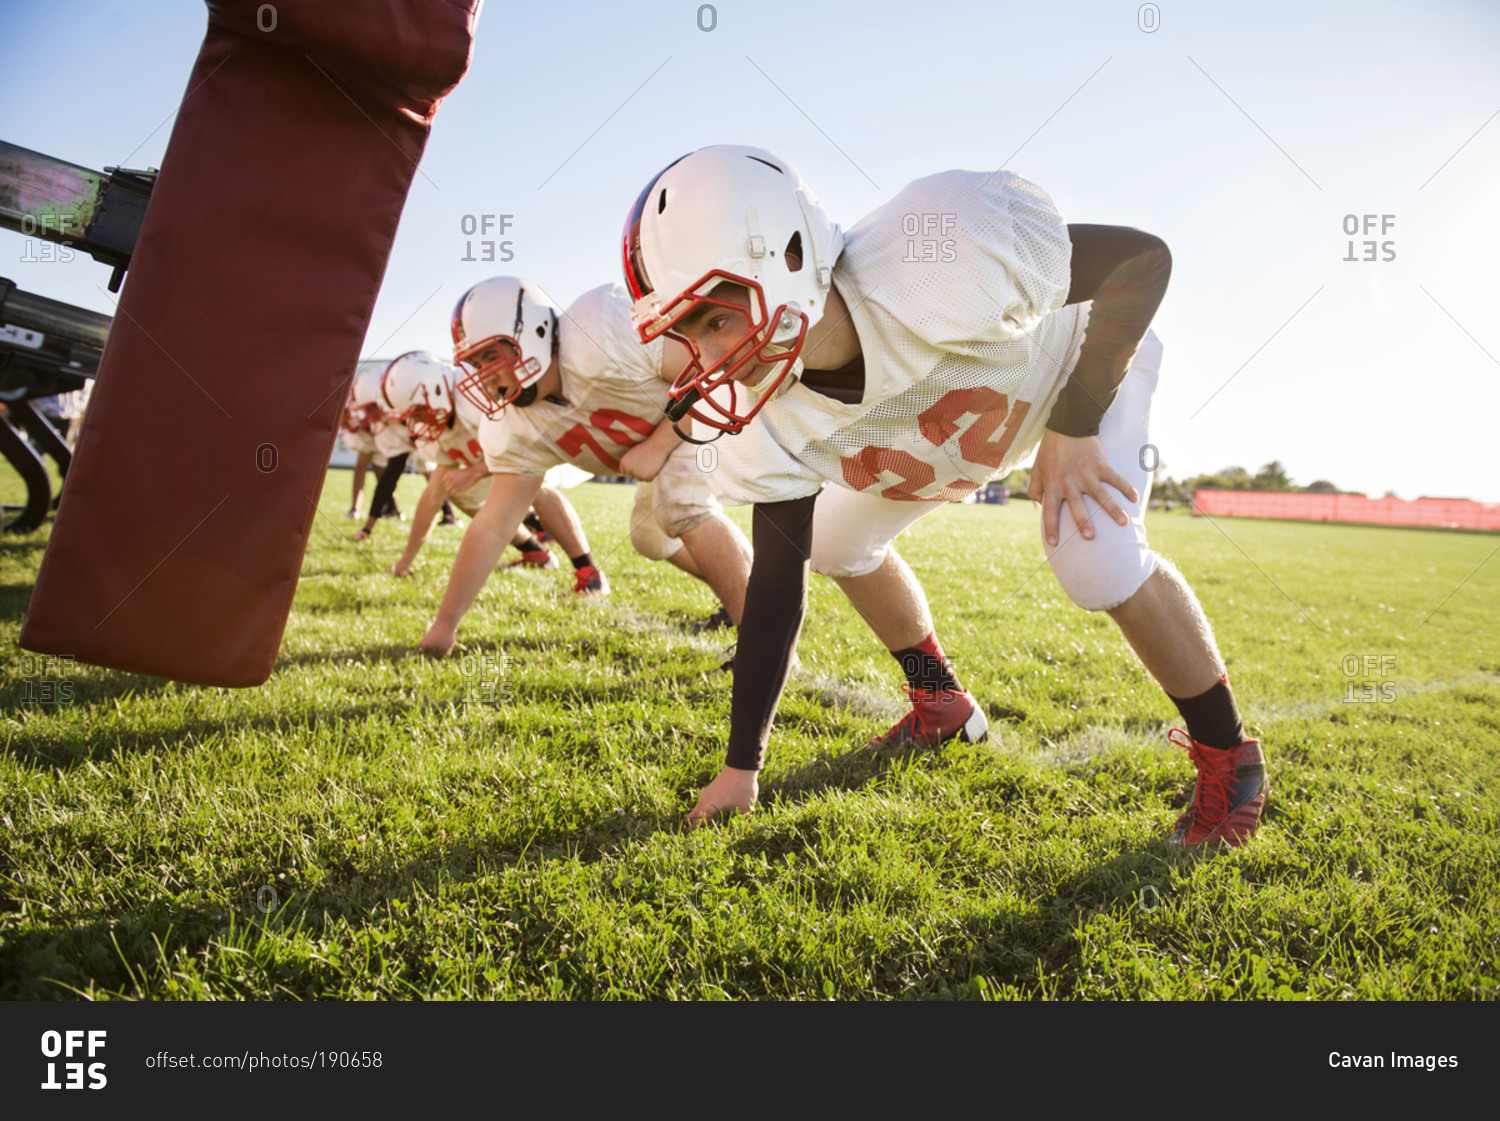 High school football players prepare to tackle a dummy